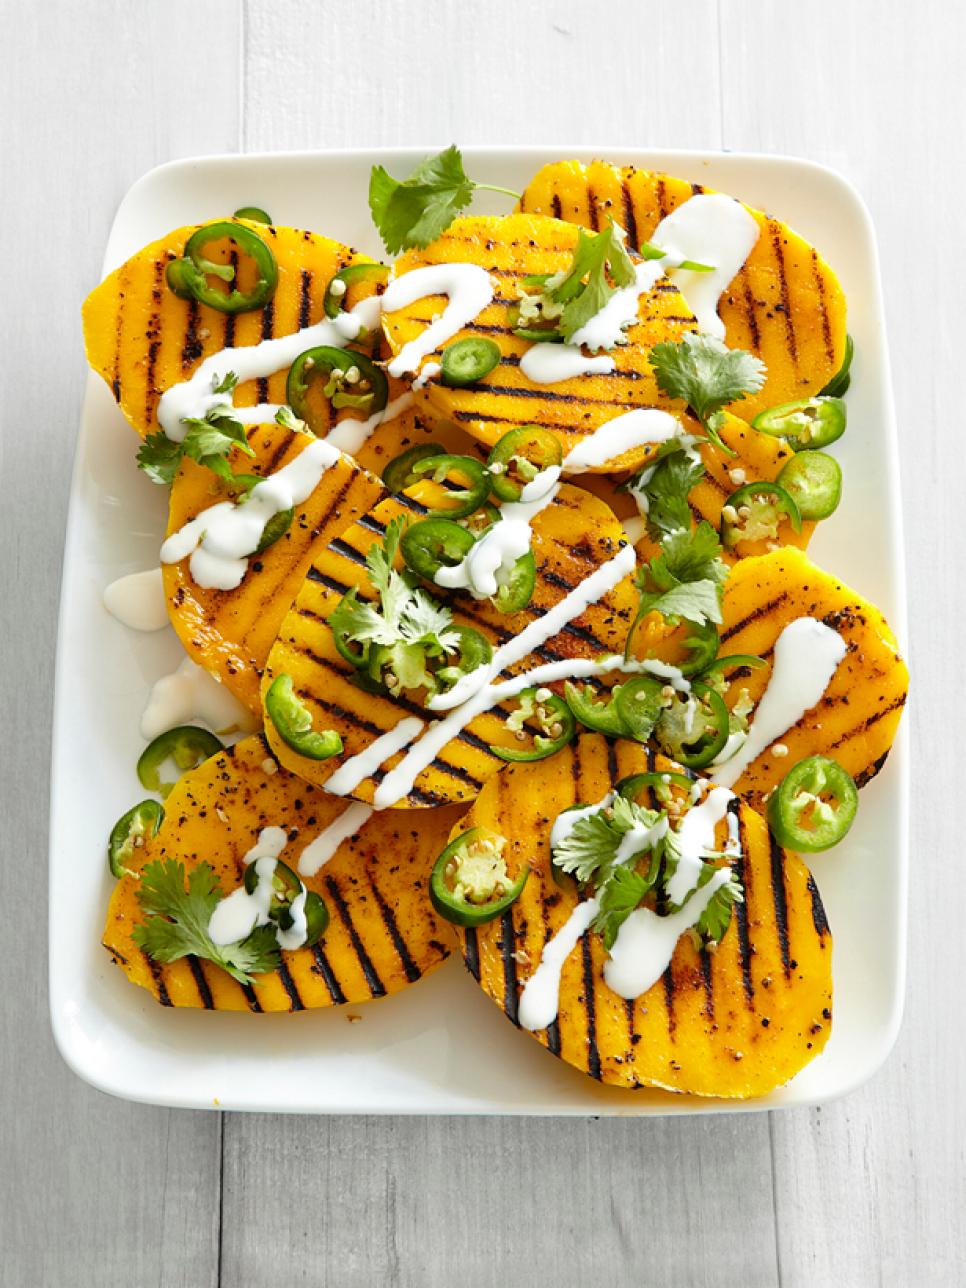 Healthy Grilling Recipes | Recipes, Dinners and Easy Meal ...